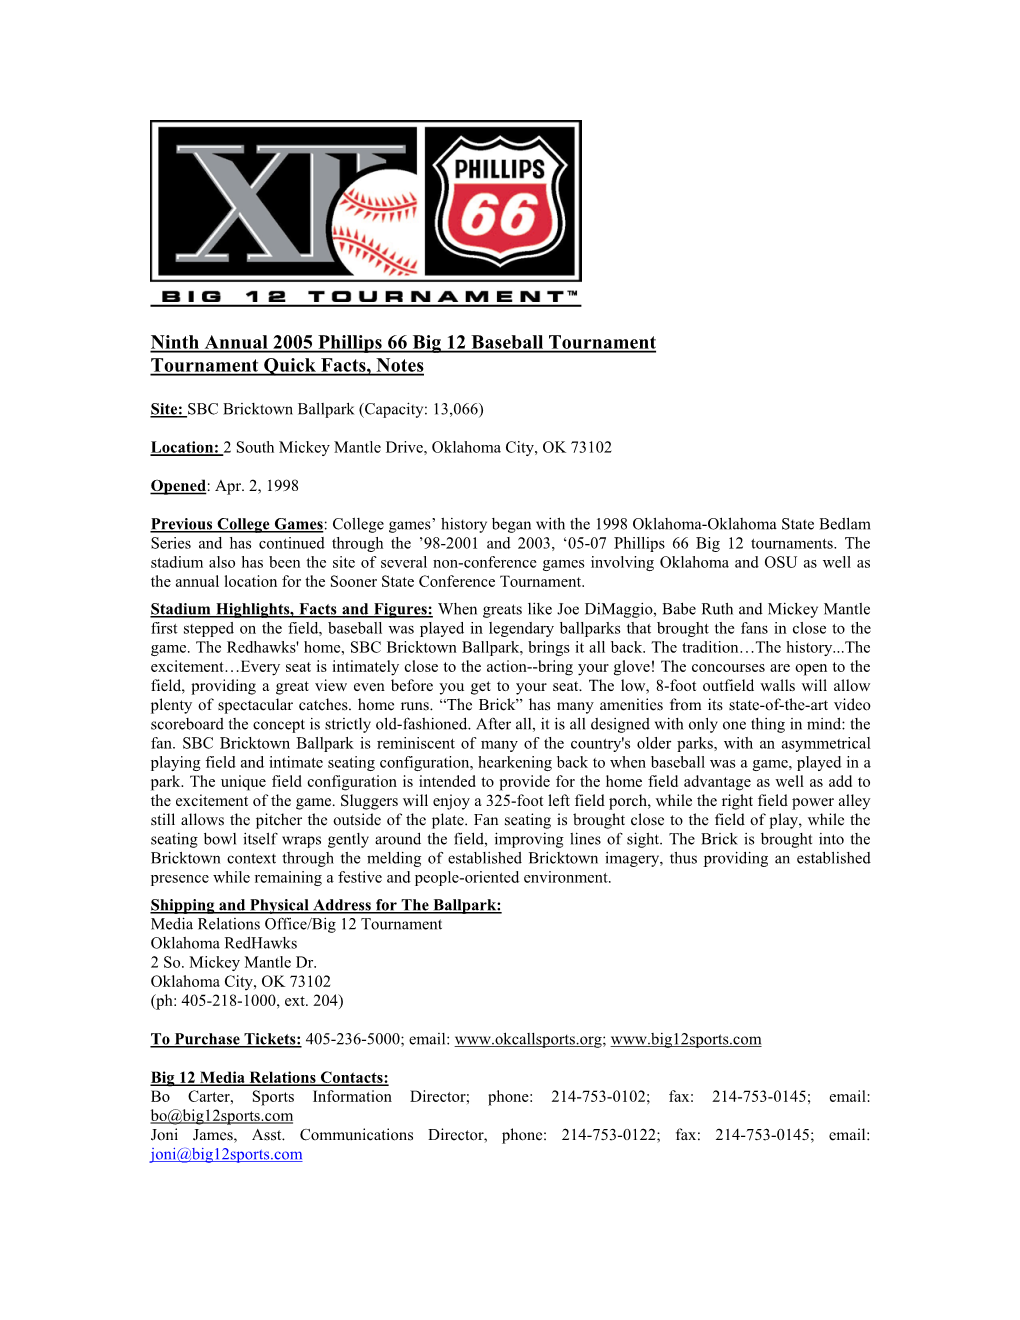 Ninth Annual 2005 Phillips 66 Big 12 Baseball Tournament Tournament Quick Facts, Notes